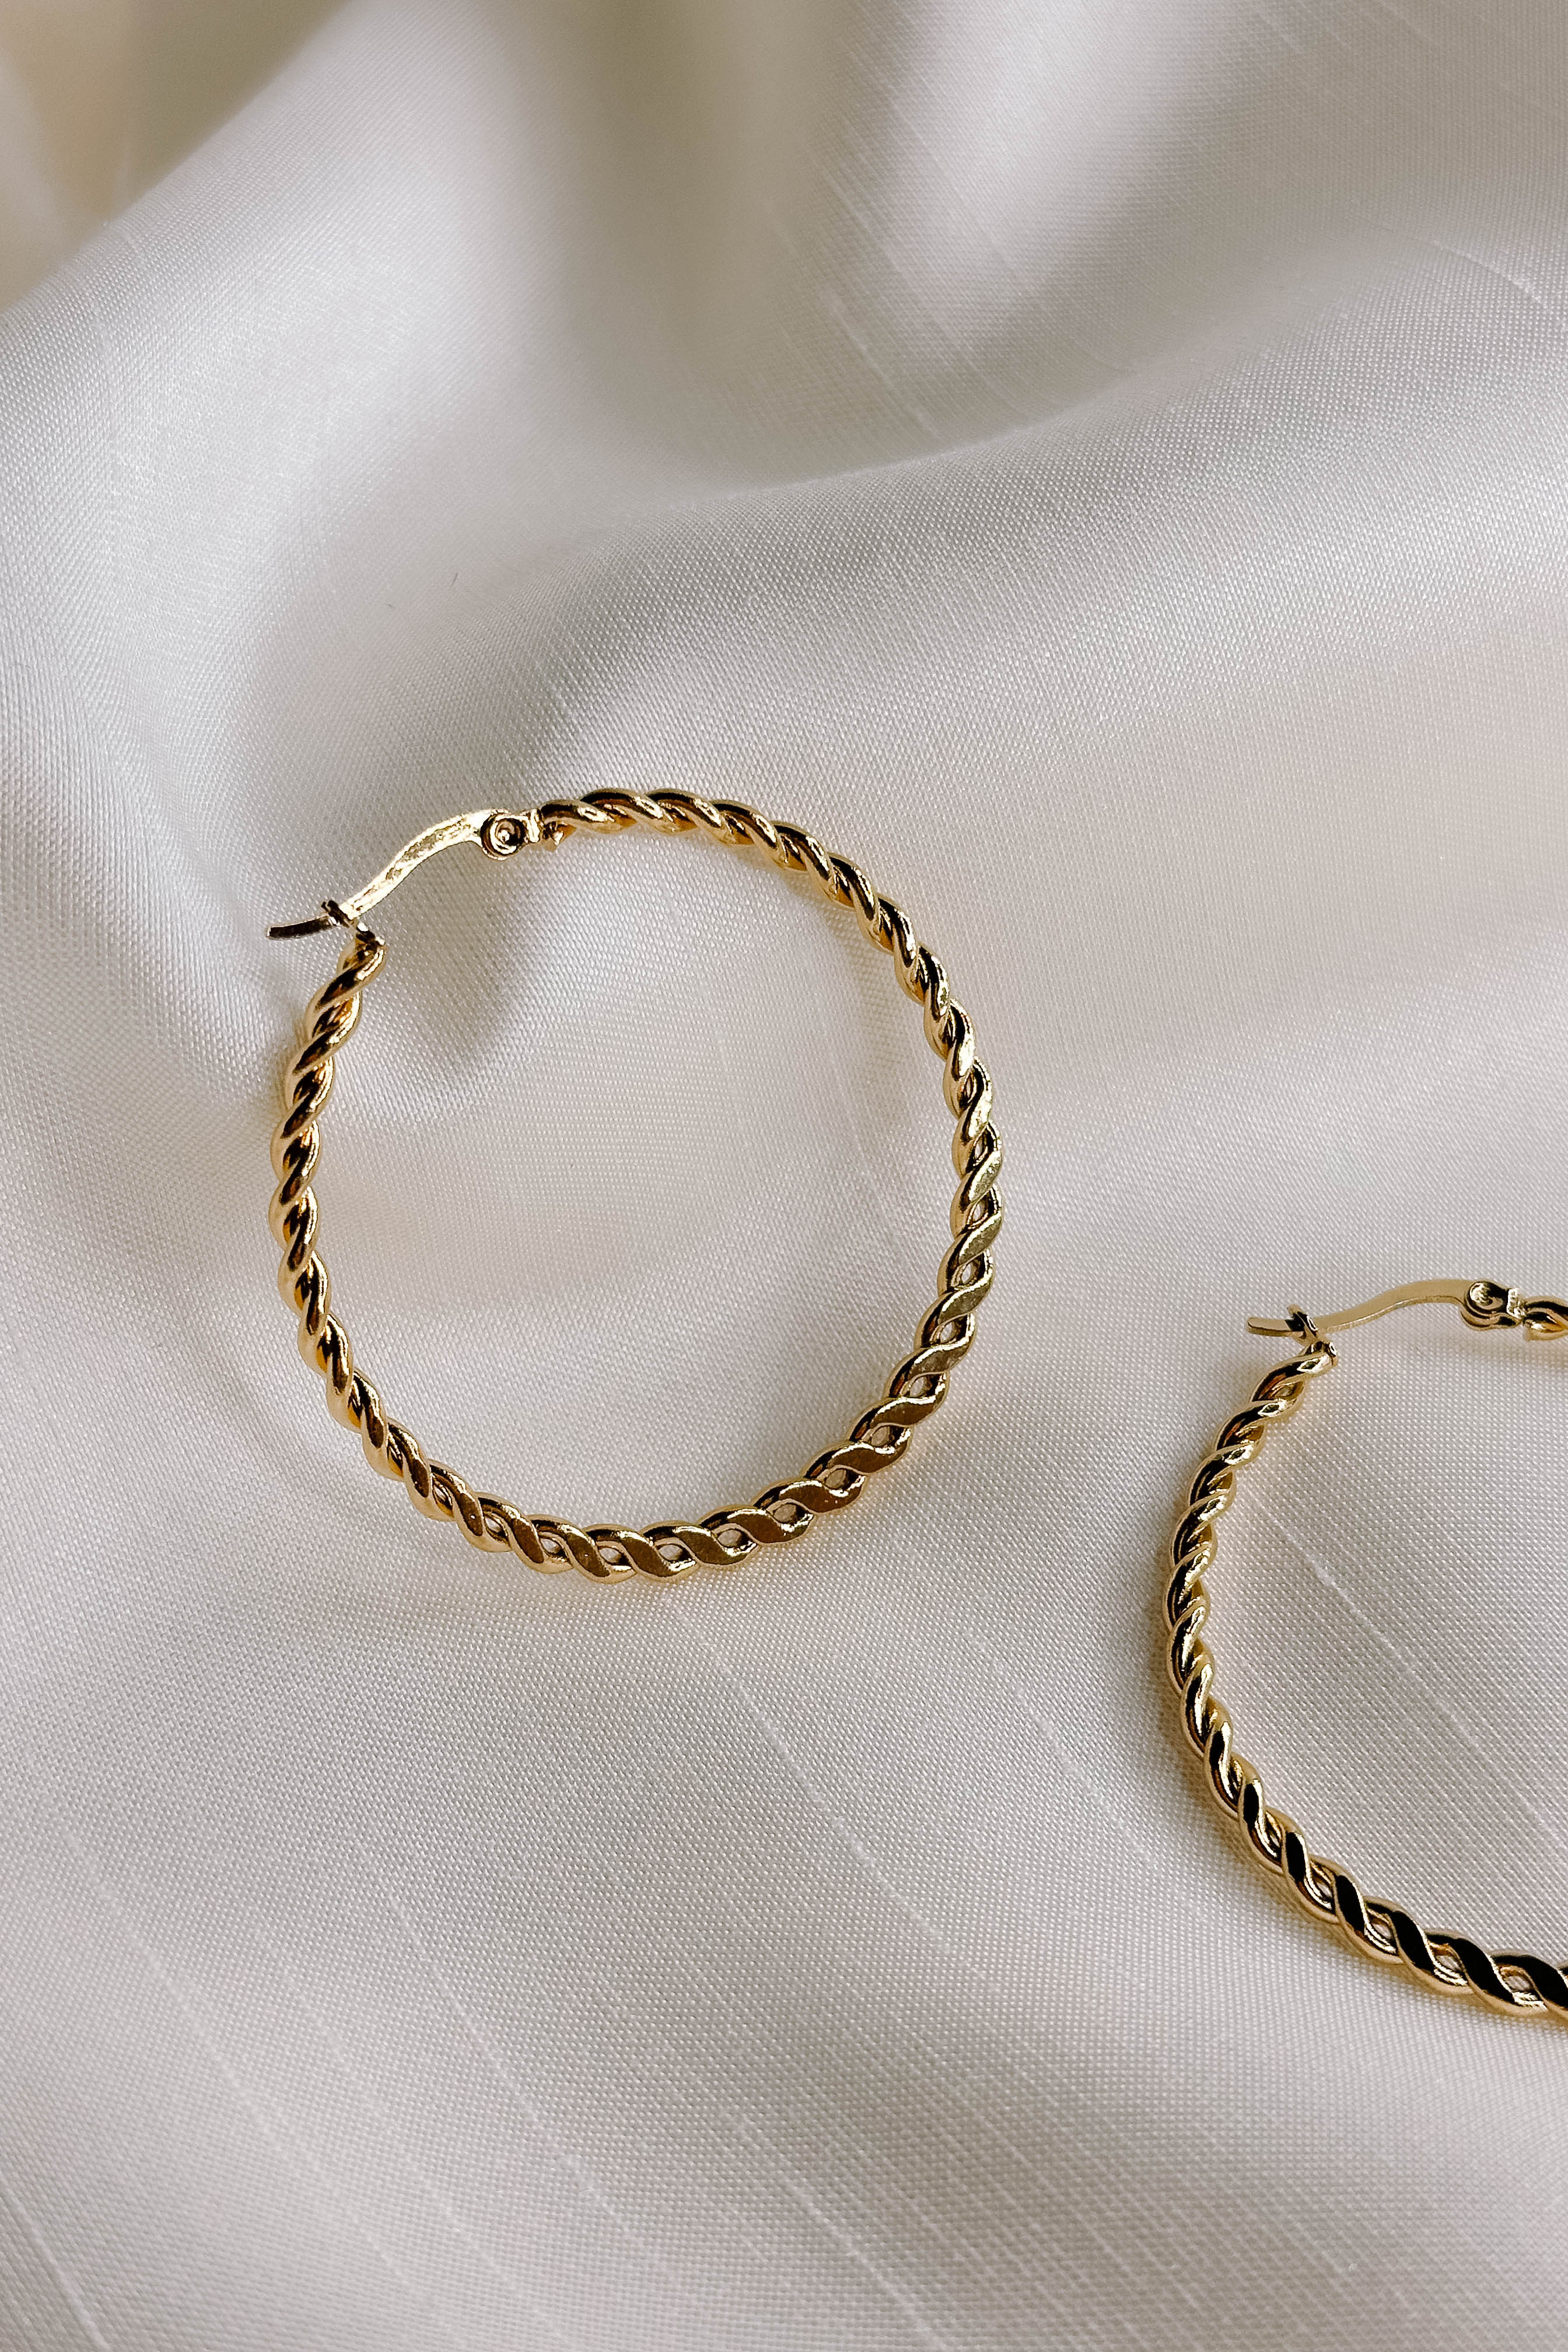 Side view of the Reese Gold Rope Hoop Earrings that feature medium closed hoops with a gold rope design and latch closures, shown against a cream fabric.